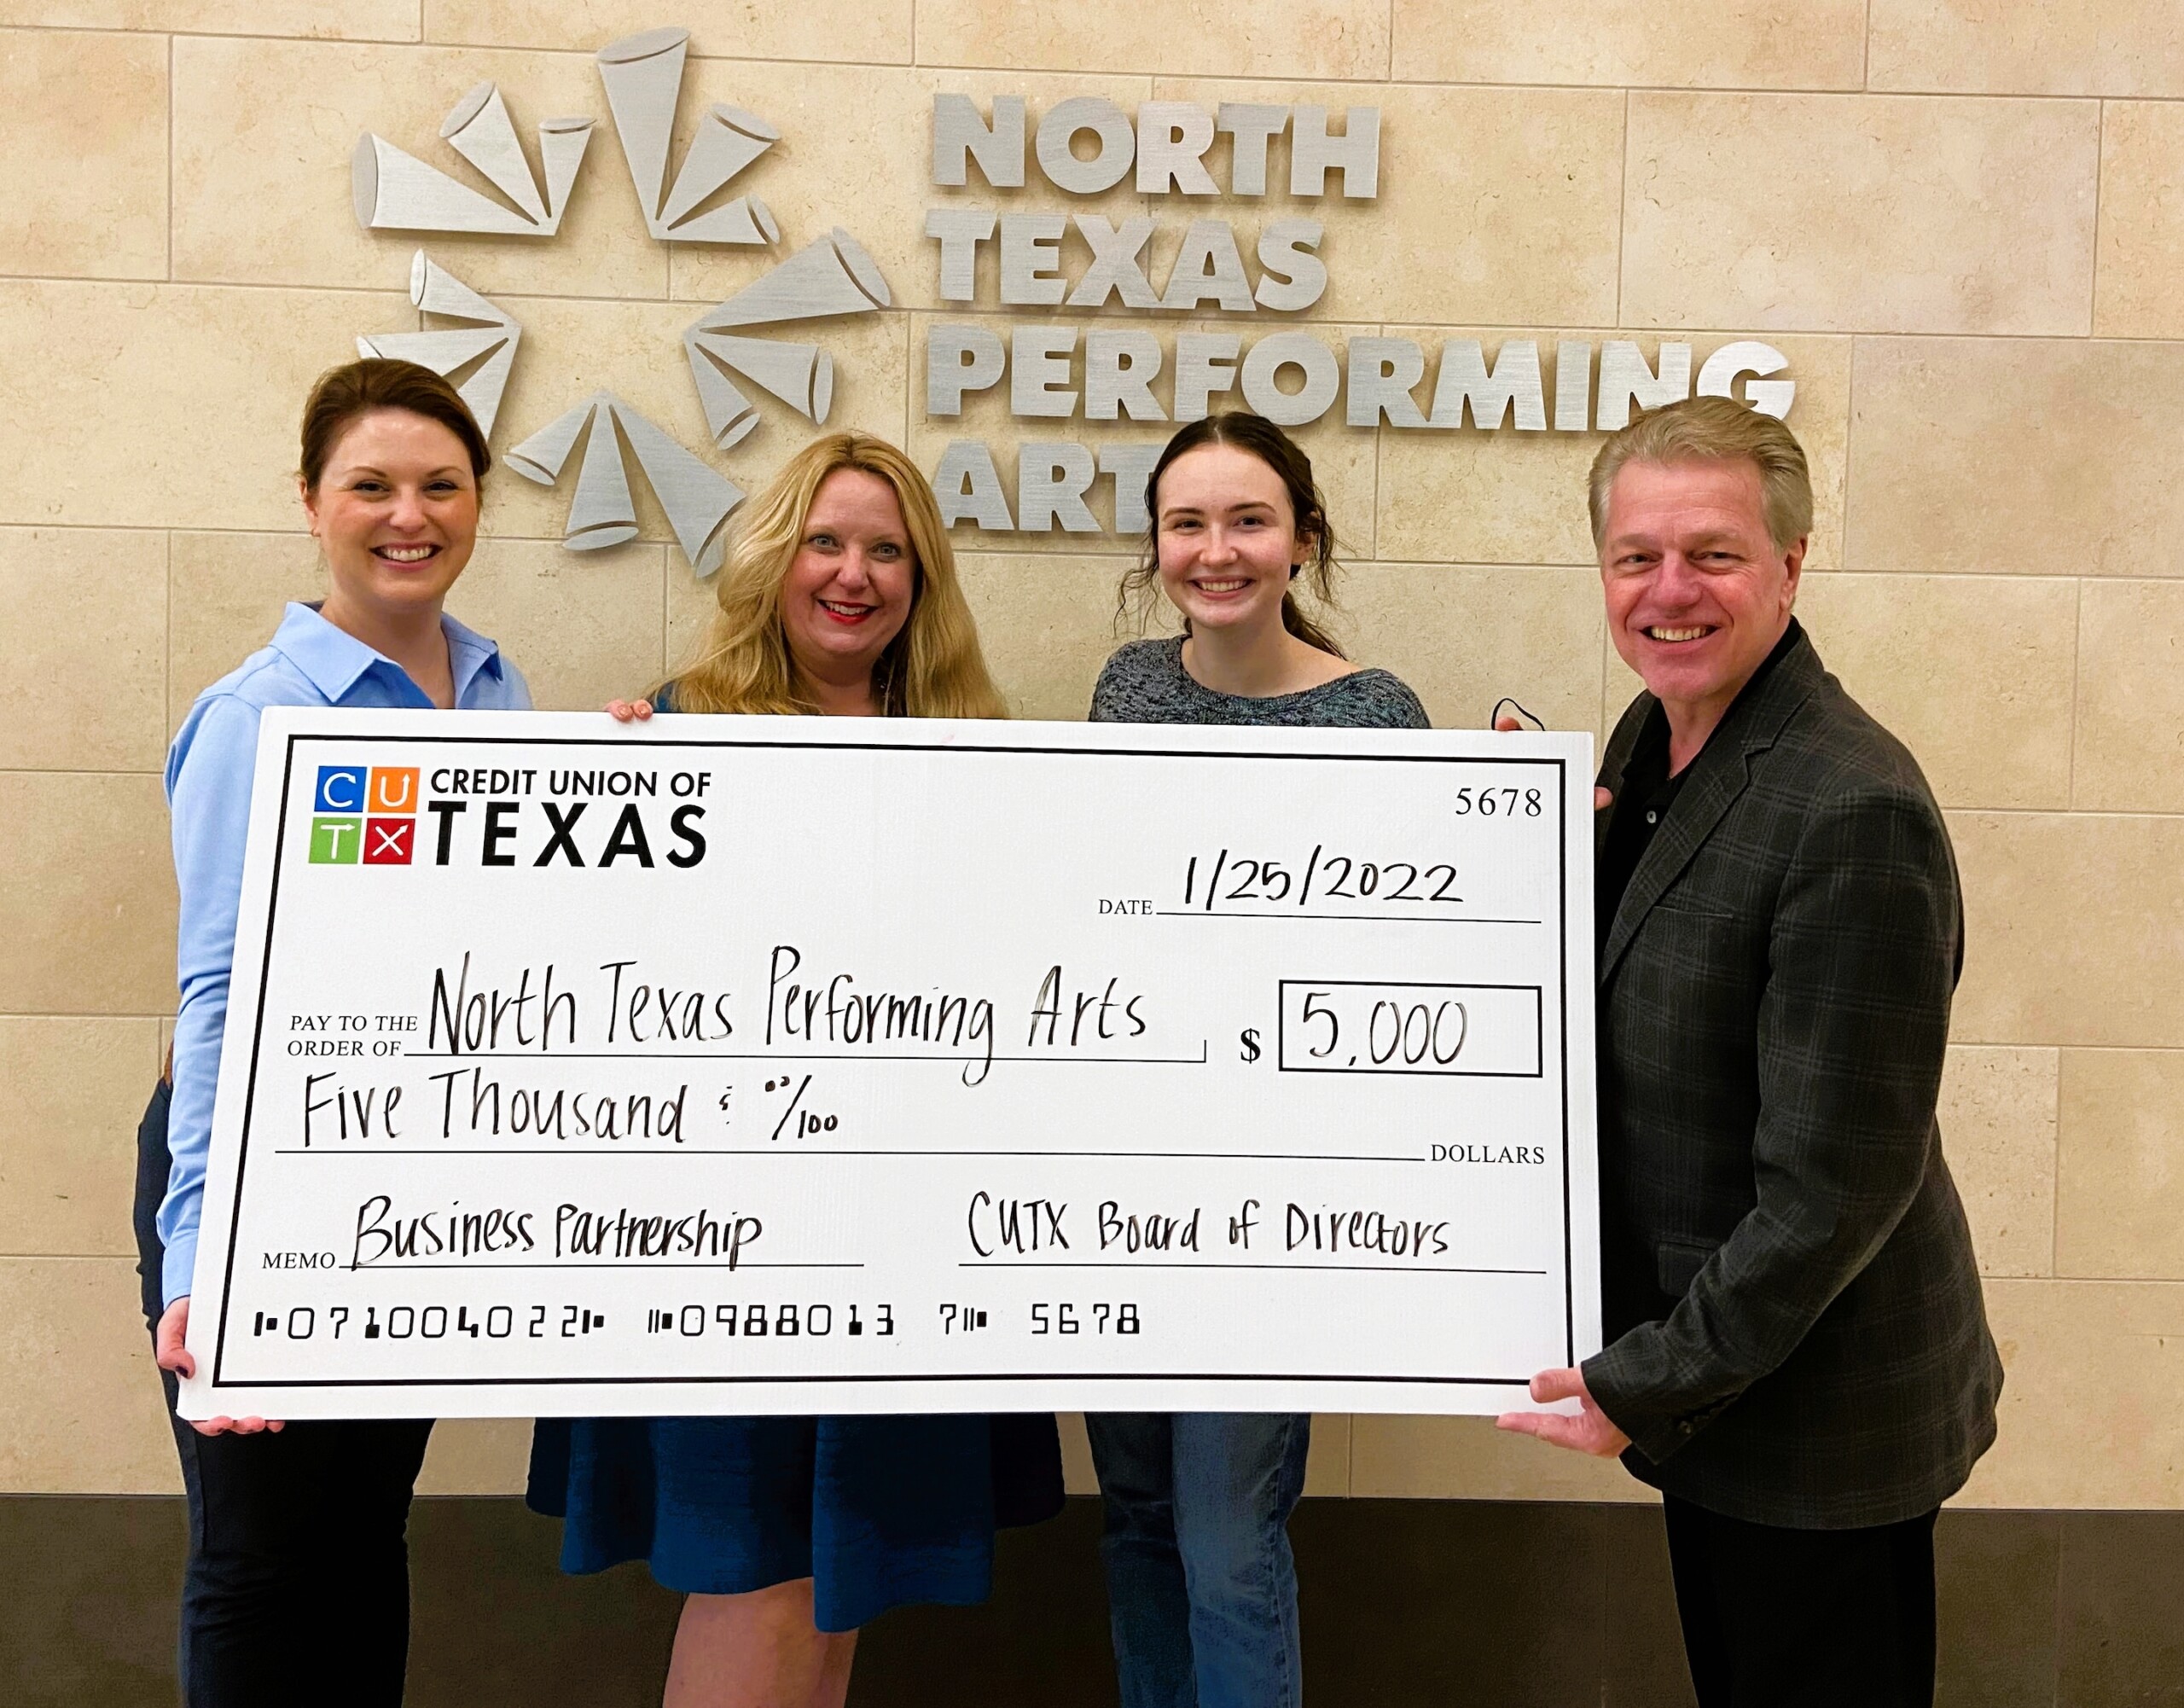 Patricia Gregory, Darrell Rodenbaugh, and members of Credit Union of Texas create partnership